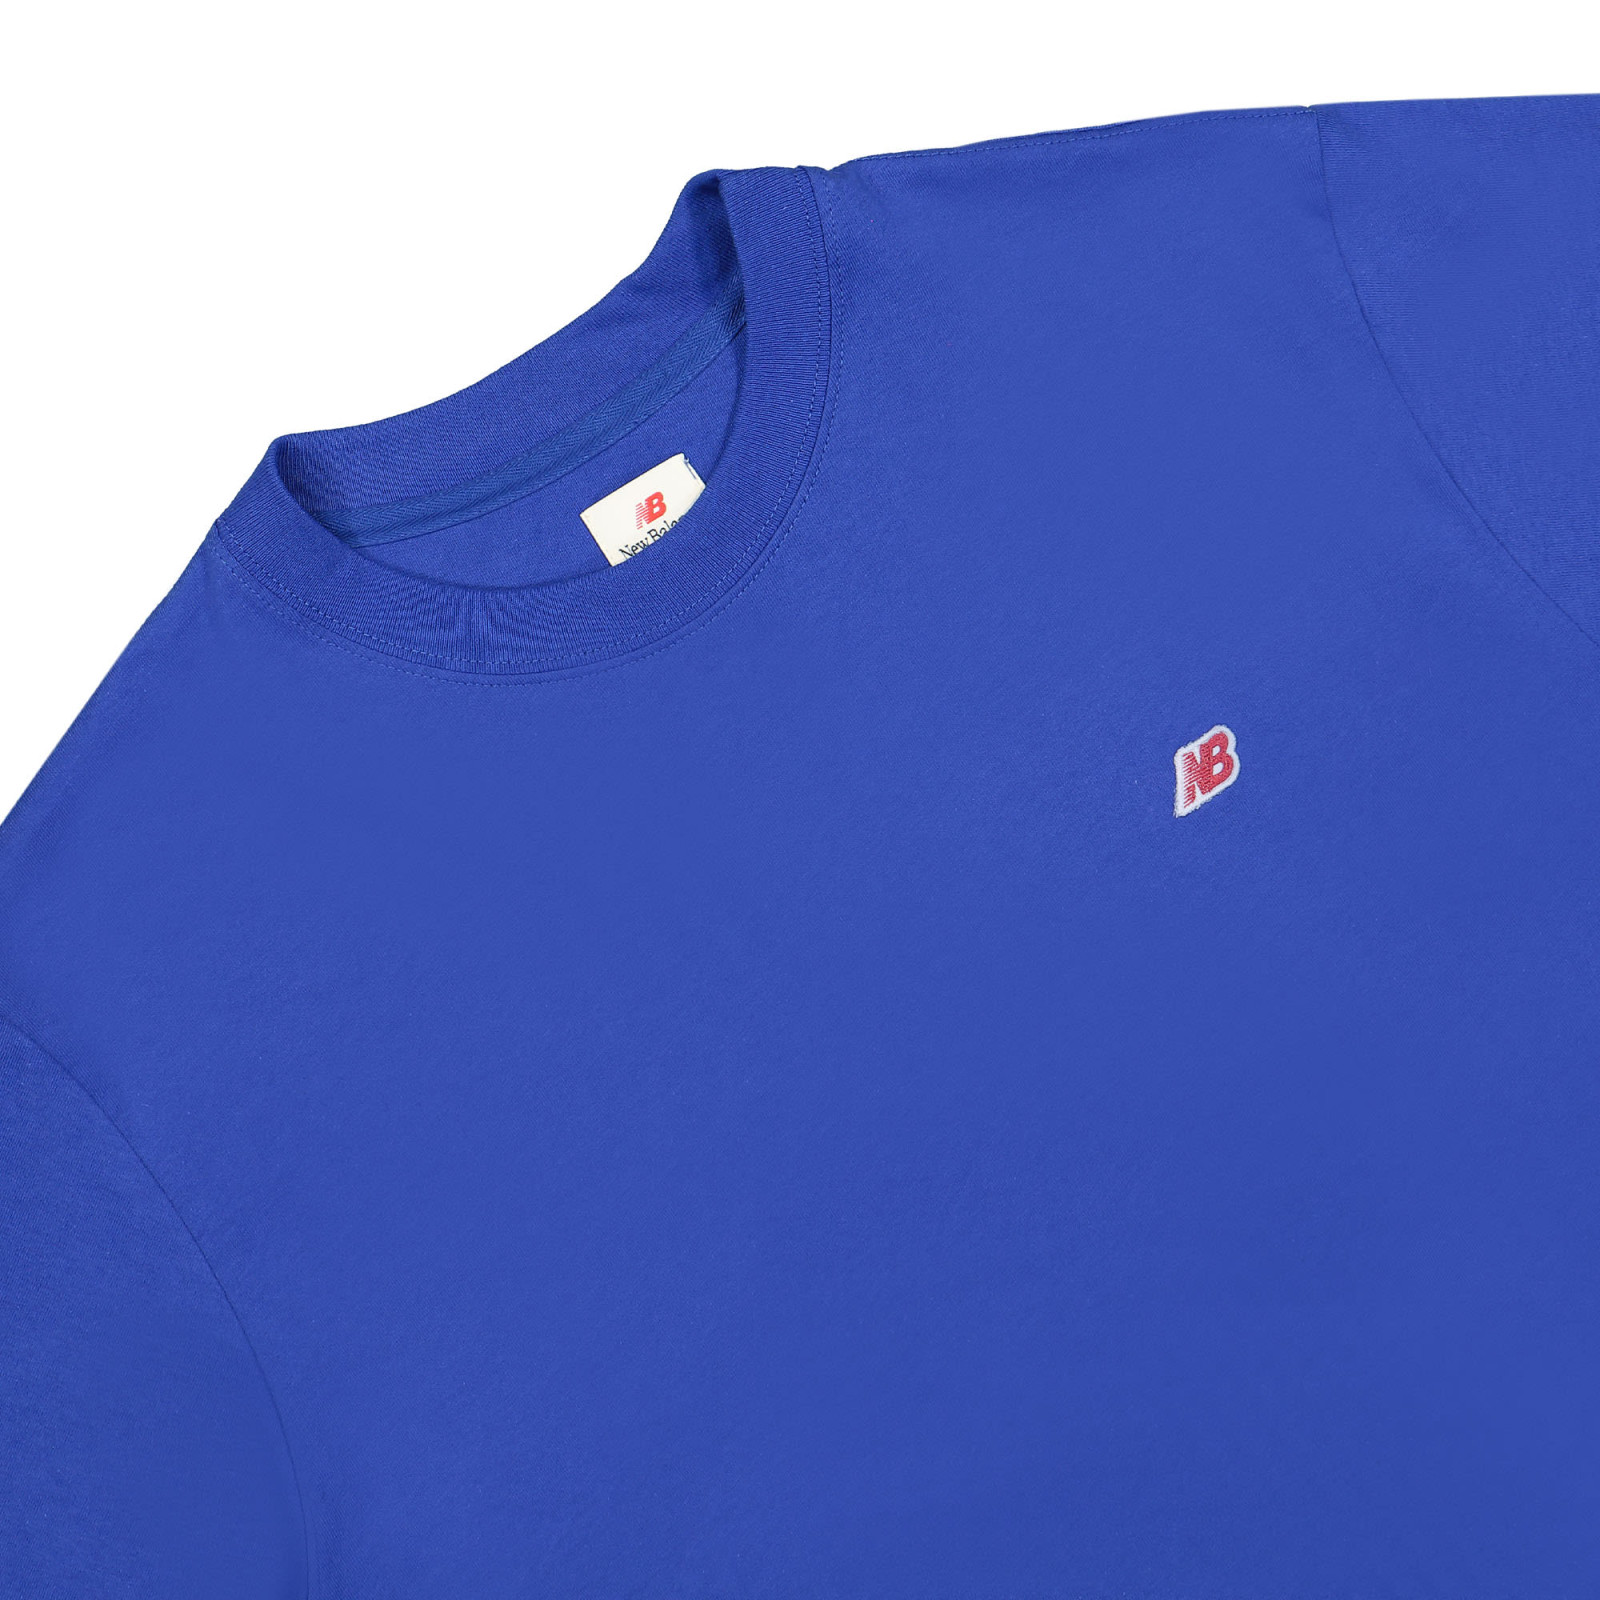 New Balance Made In USA
Core SS Tee
Blue